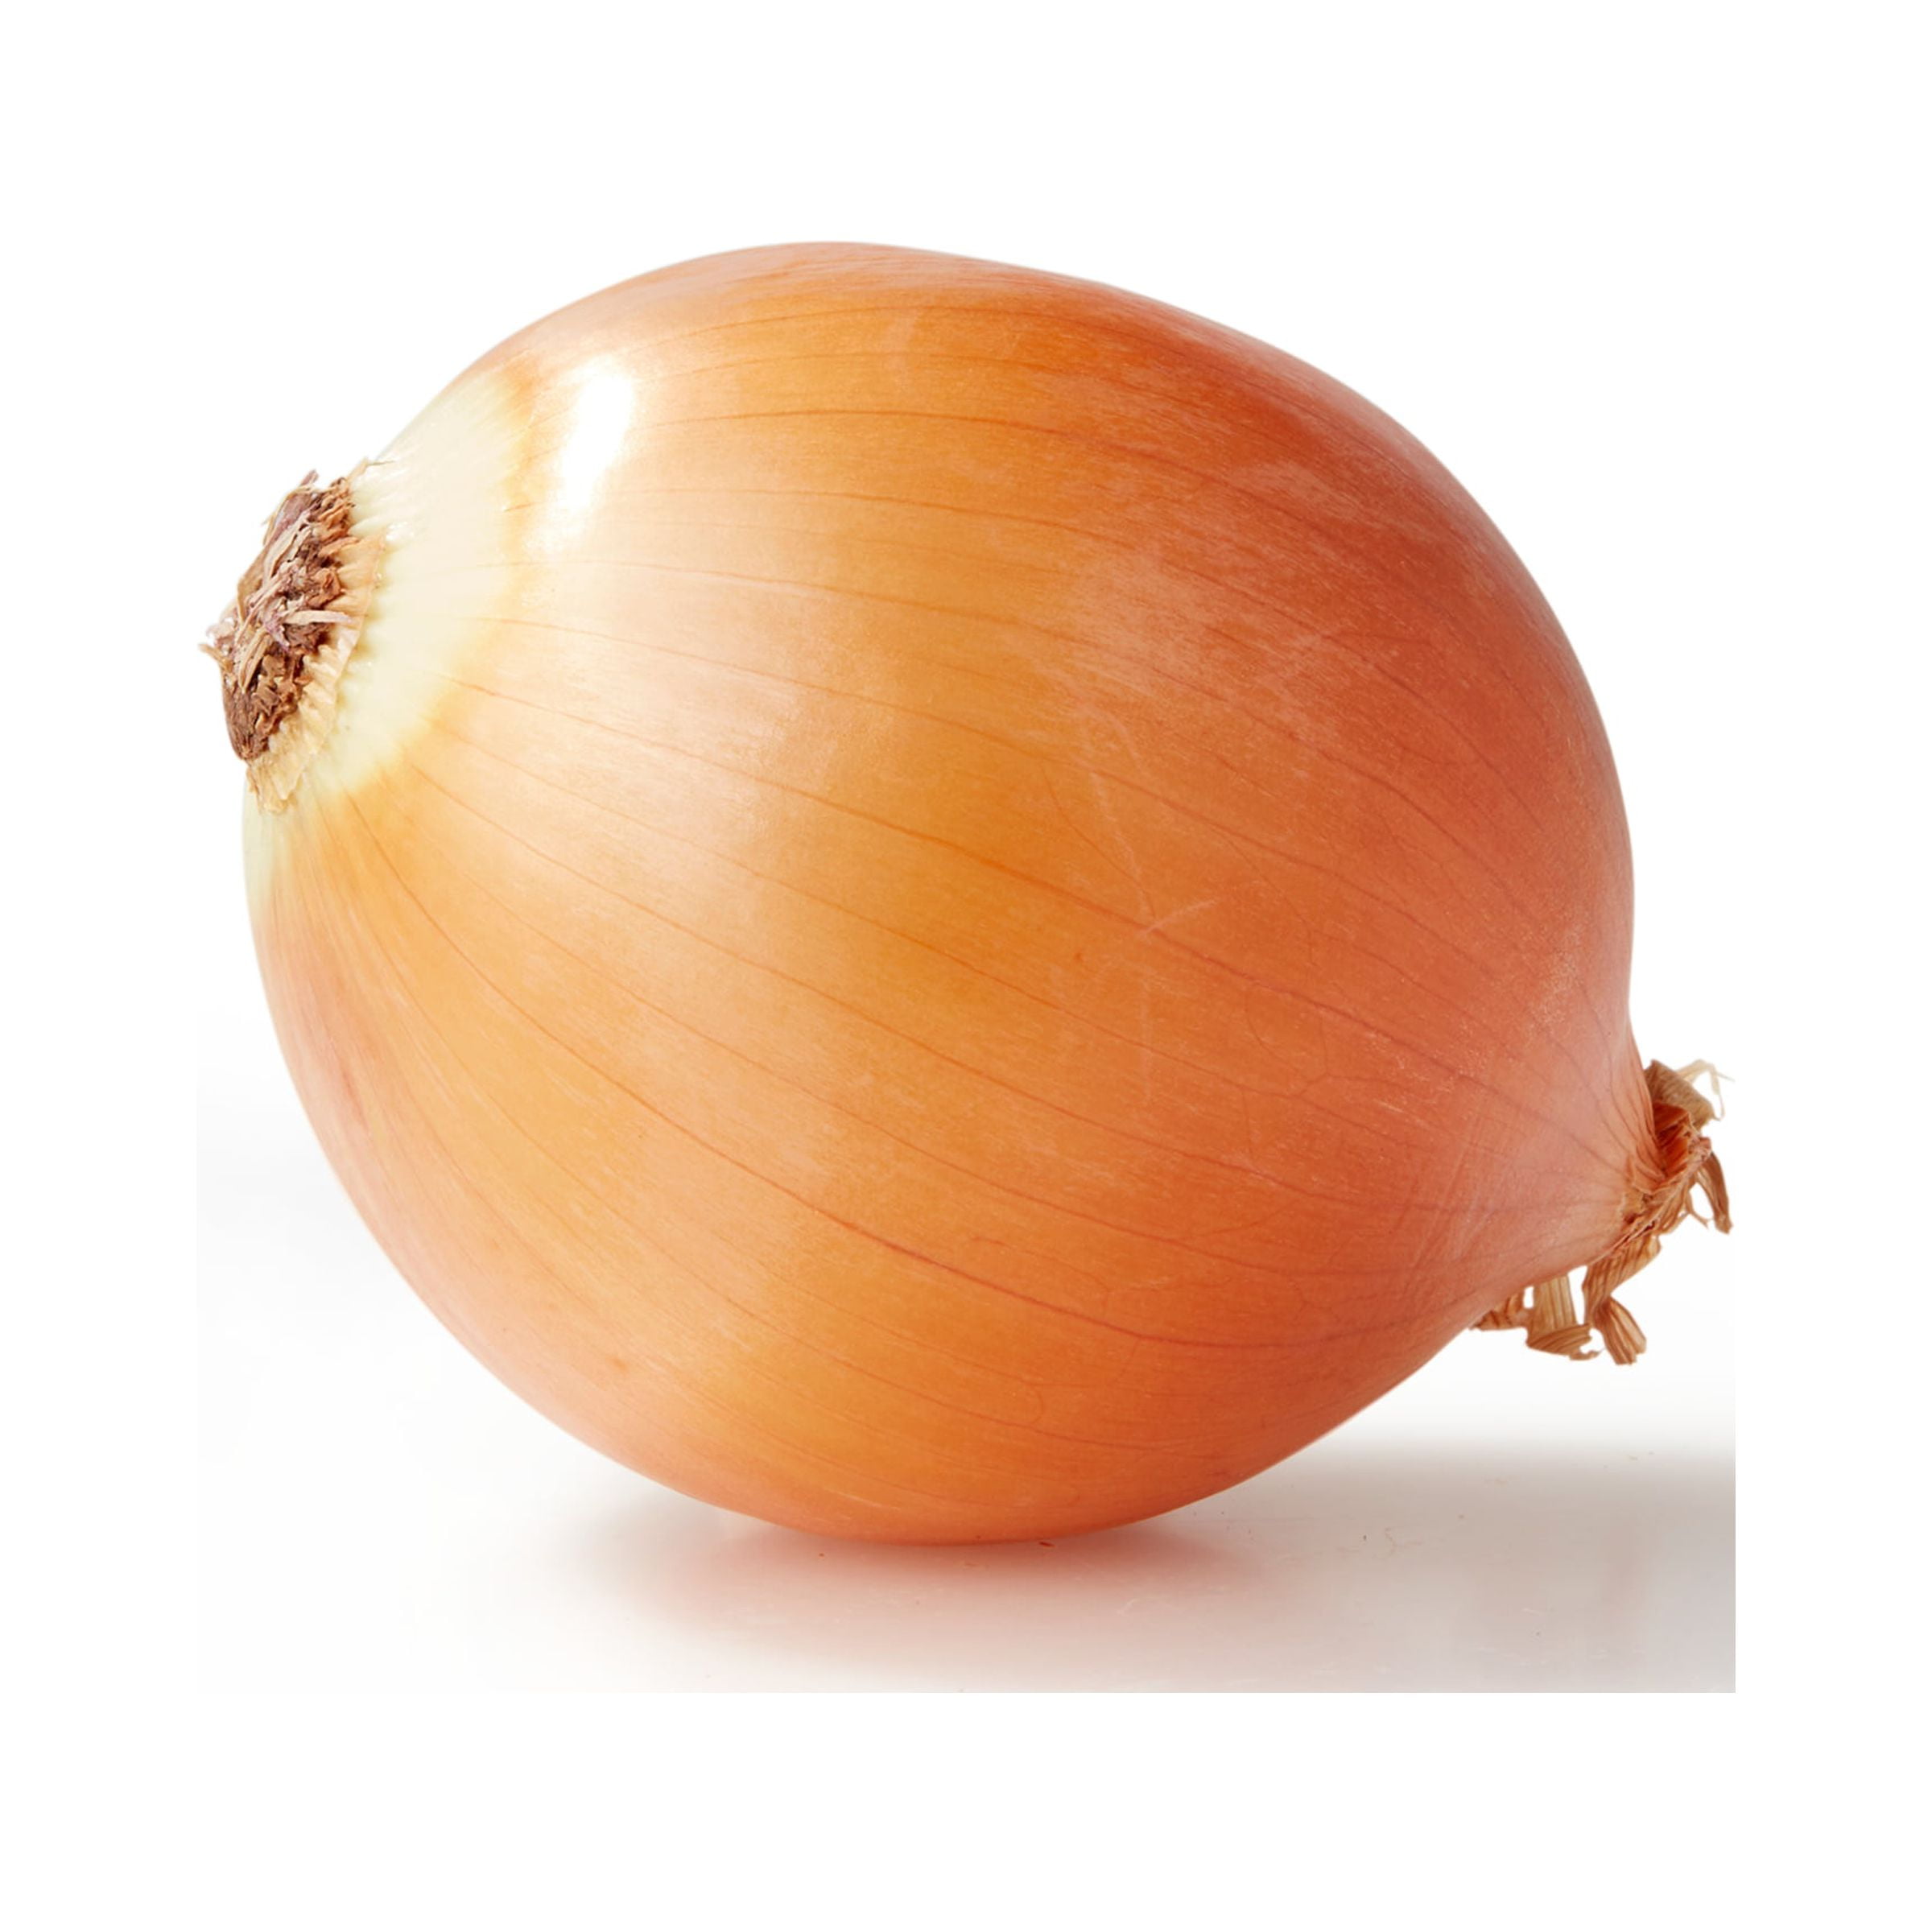 FRESH Red Onion 3 Pound Bag - Sold by bag